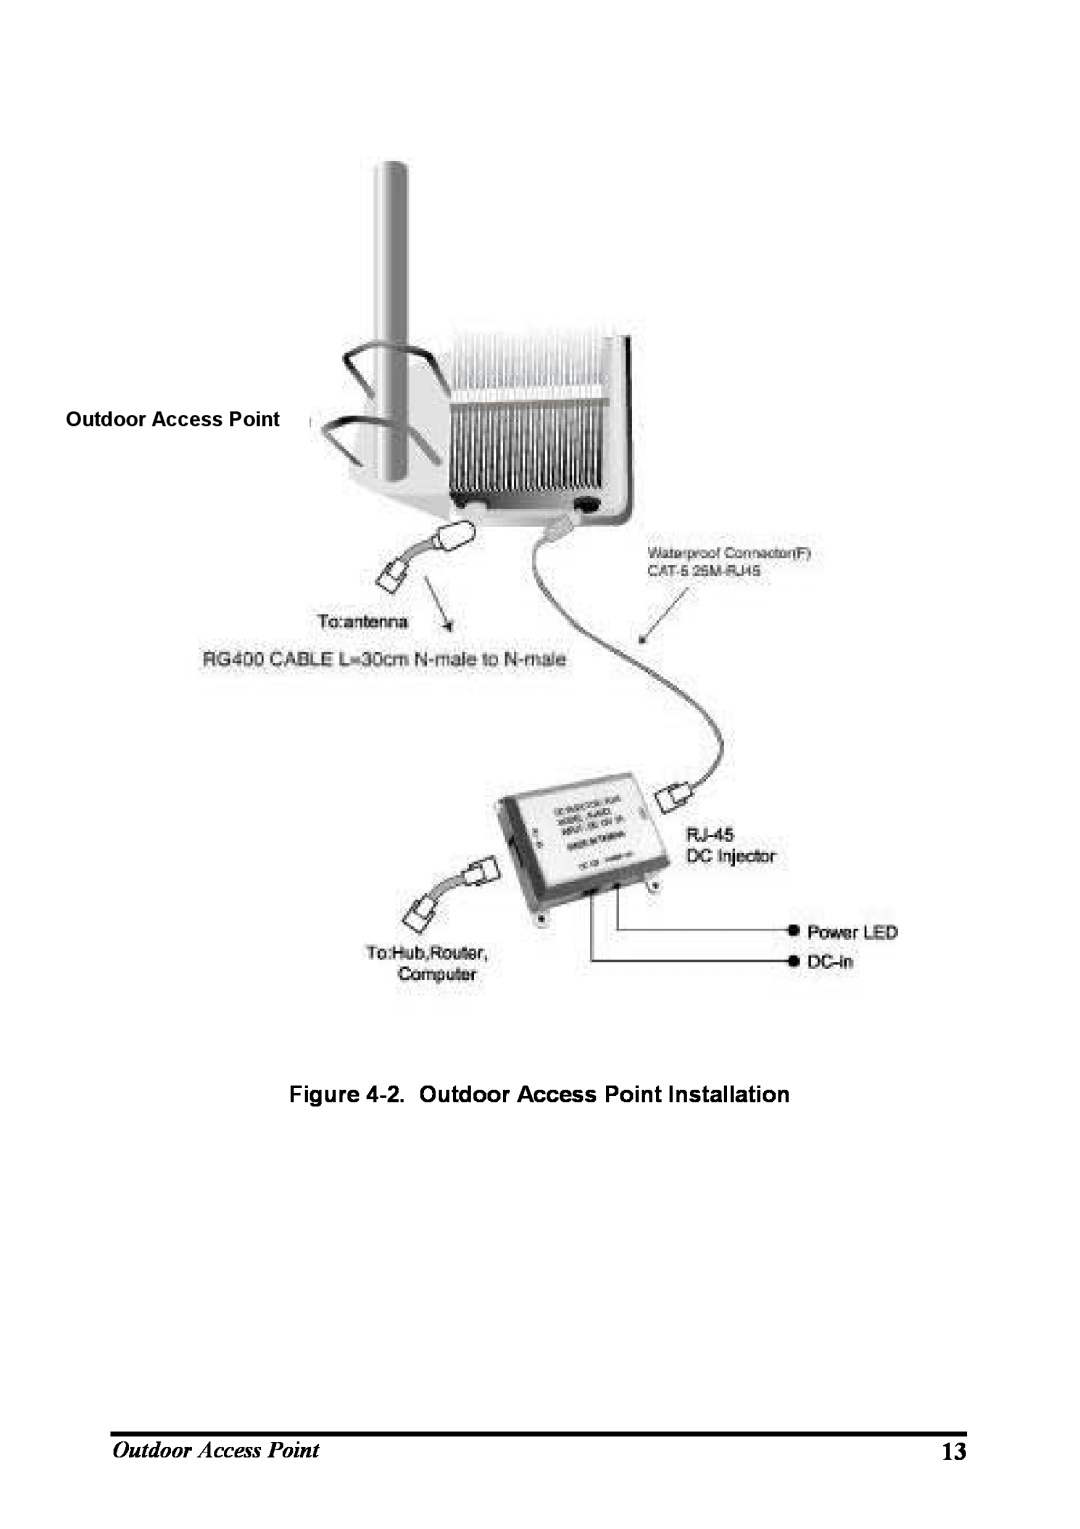 WHP Wireless WHP-1100, WHP-1120, WHP-1130 user manual 2. Outdoor Access Point Installation 